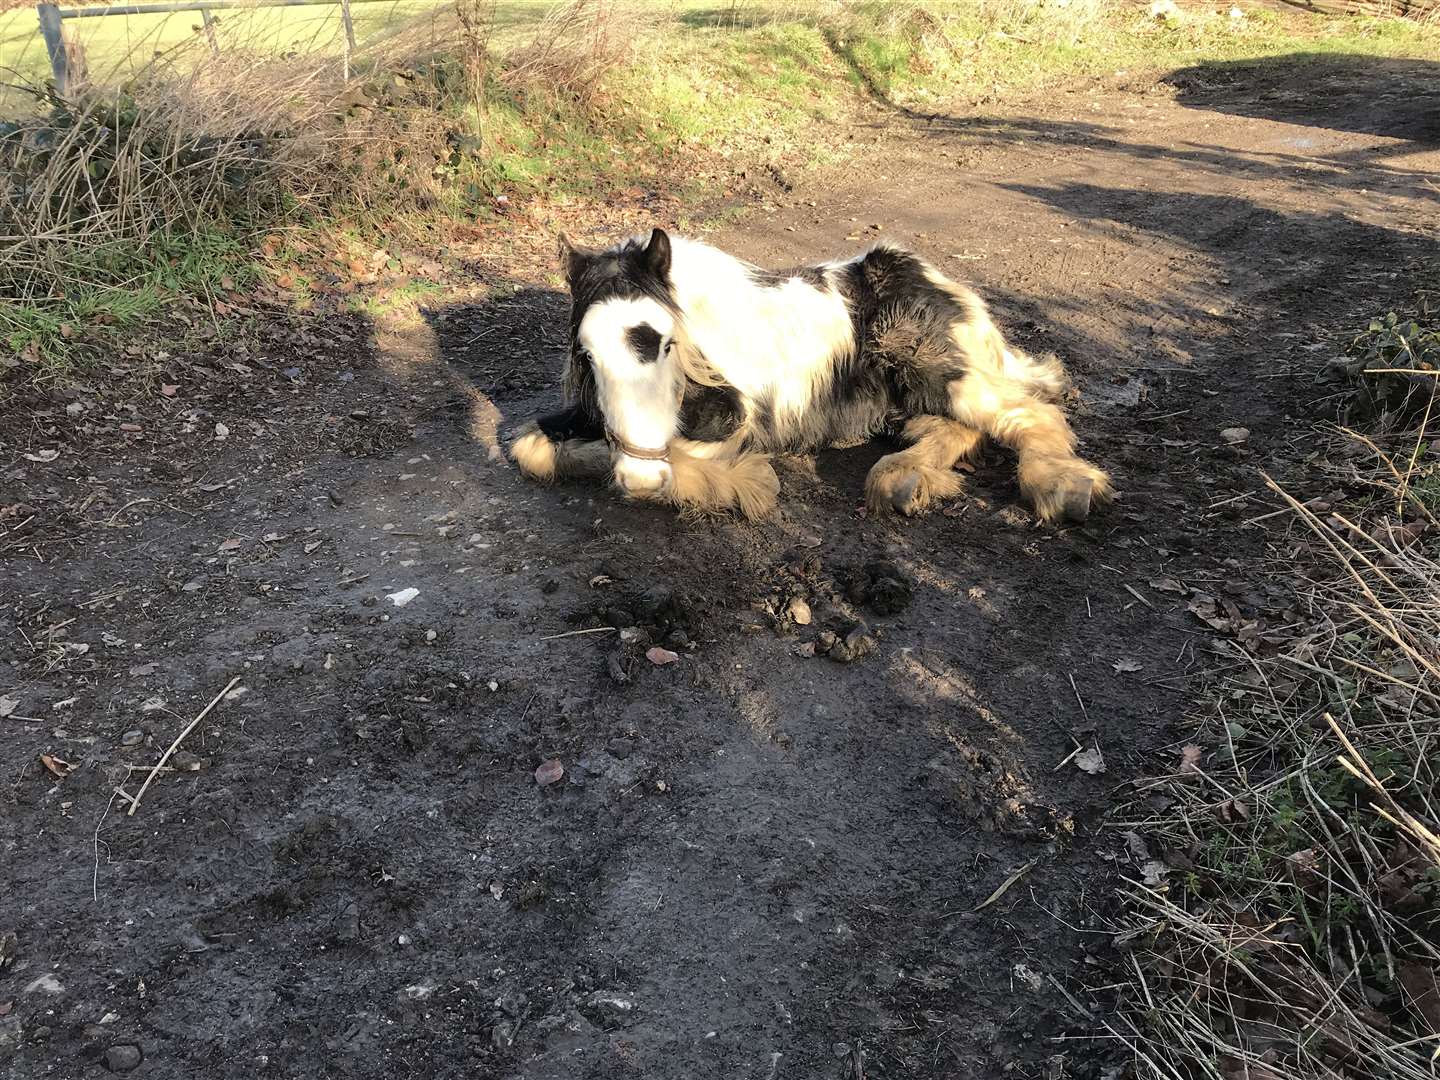 This pony found dumped in a lane near Maidstone earlier this year has since died, despite attempts to save it. Picture: RSPCA